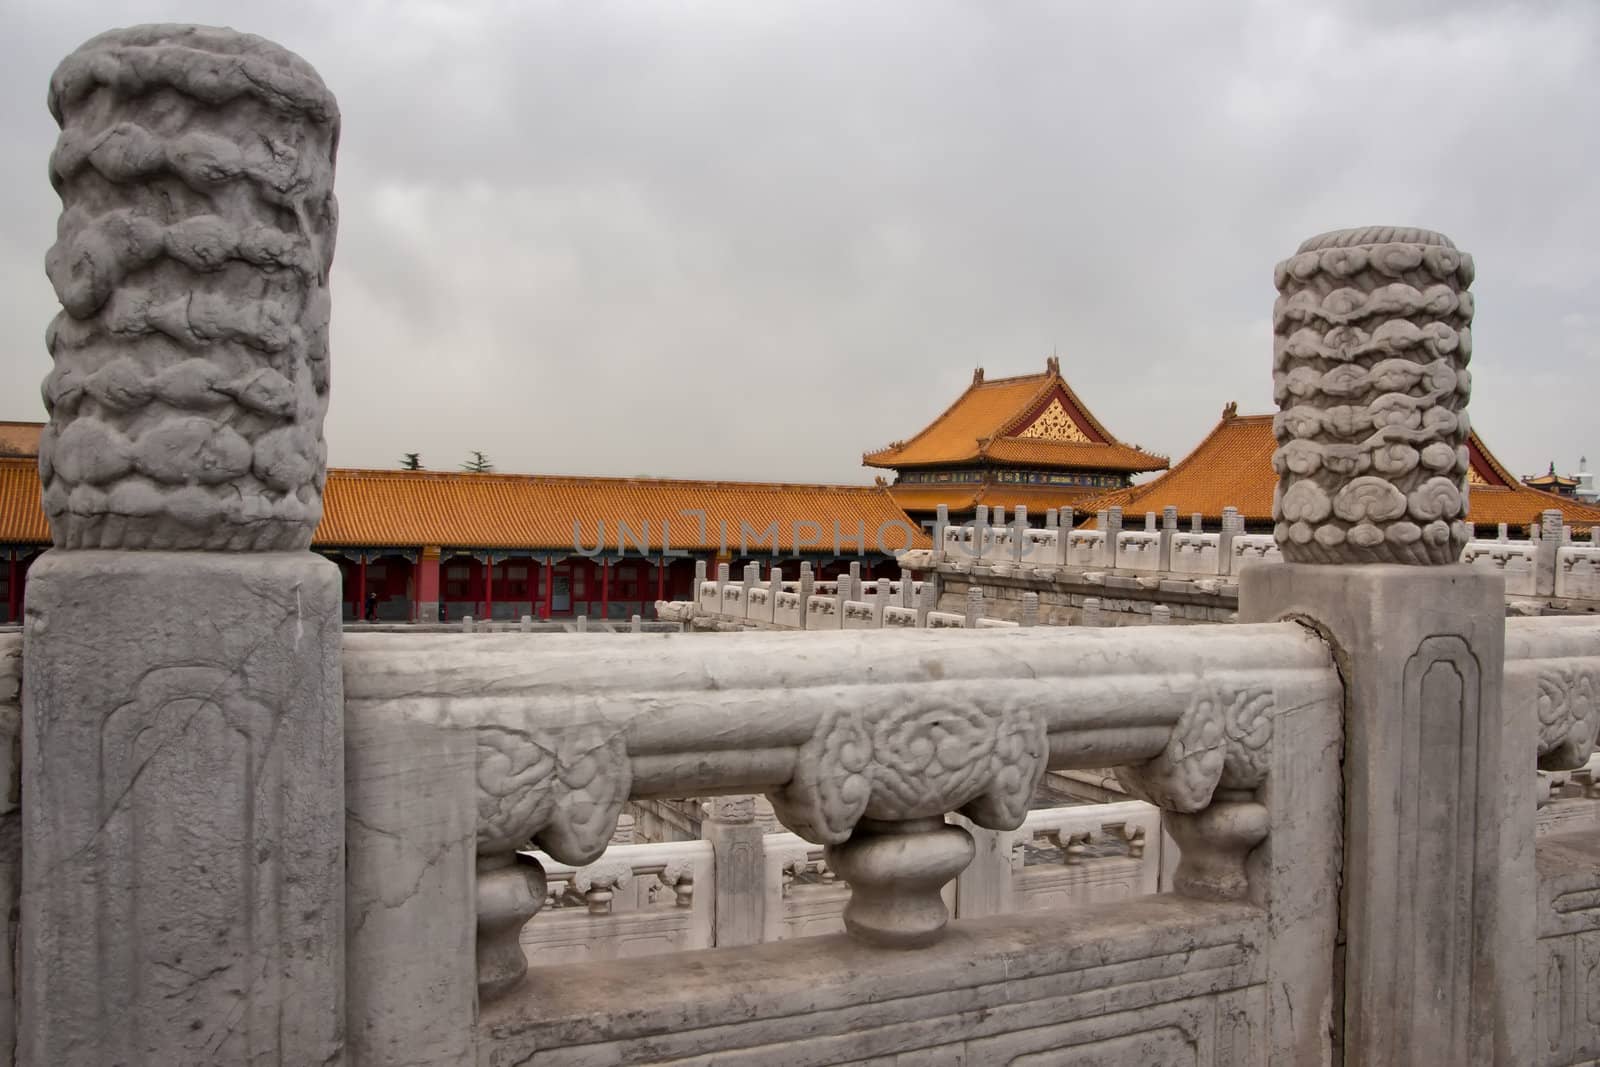 Beijing Forbidden City: from the balcony. by Claudine